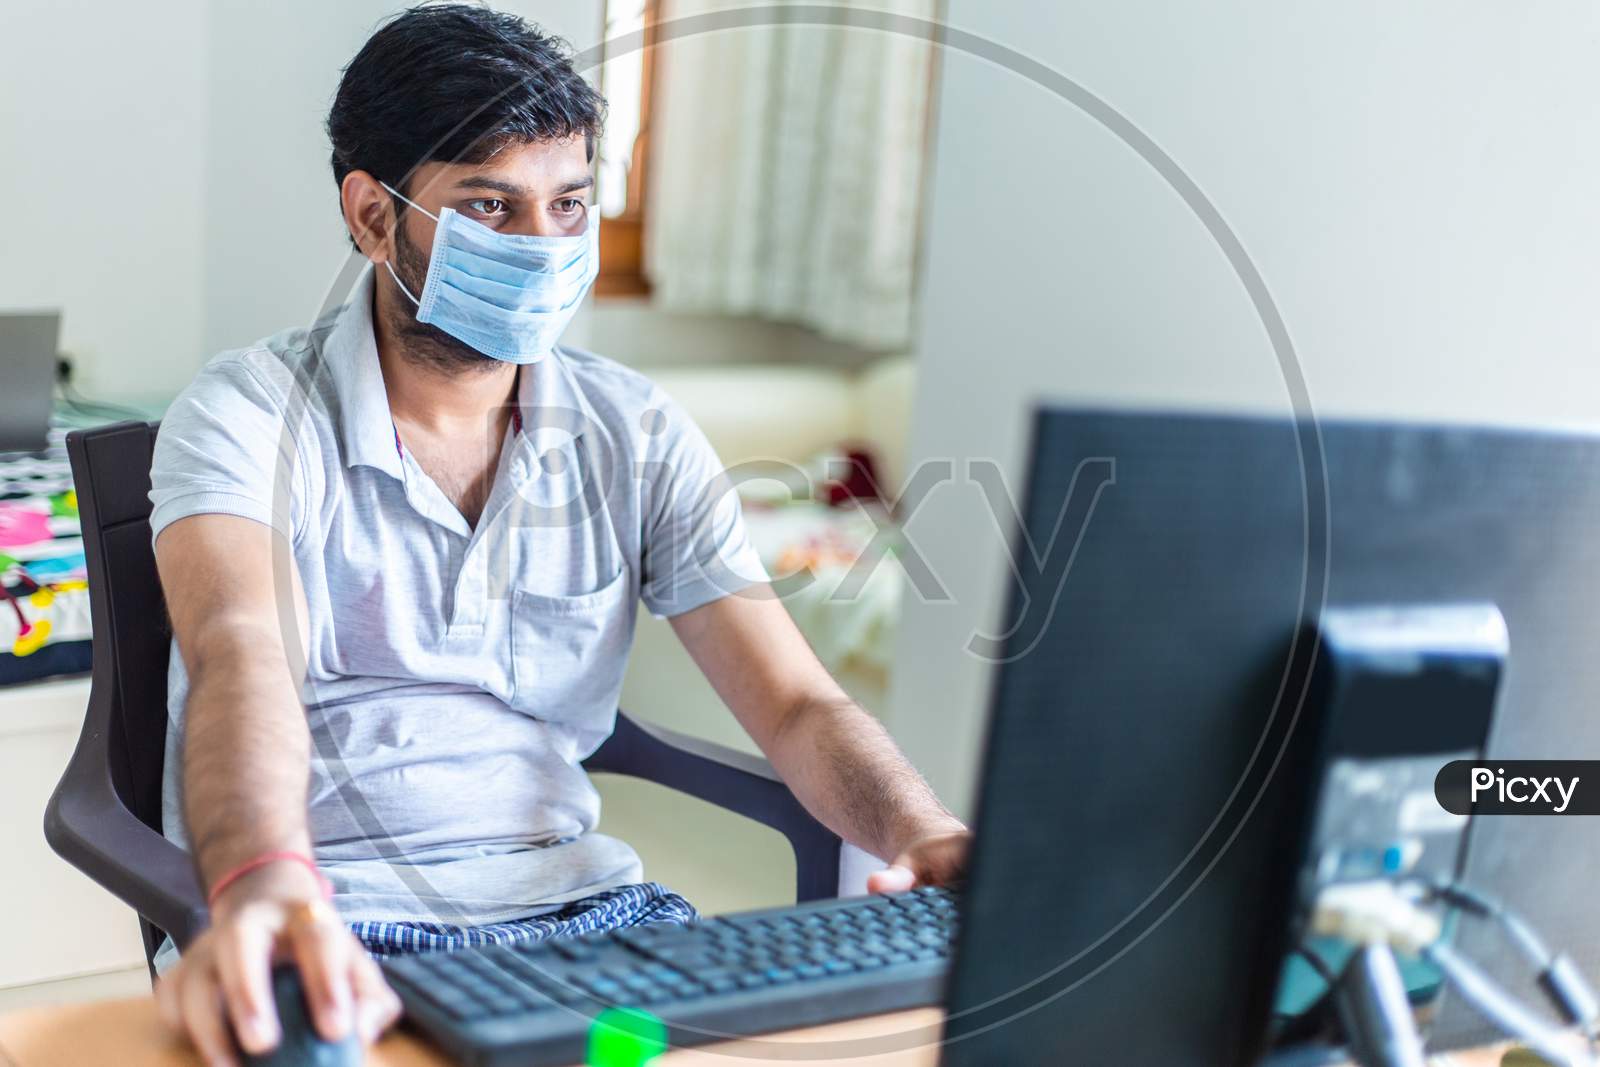 Young Man Quarantined At Home During World Pandemic Of Coronavirus Covid-19 Prevention. Stay At Home, Stay Safe. Man With Protective Medical Mask Using Computer. Isolation, Lock Down Situation.